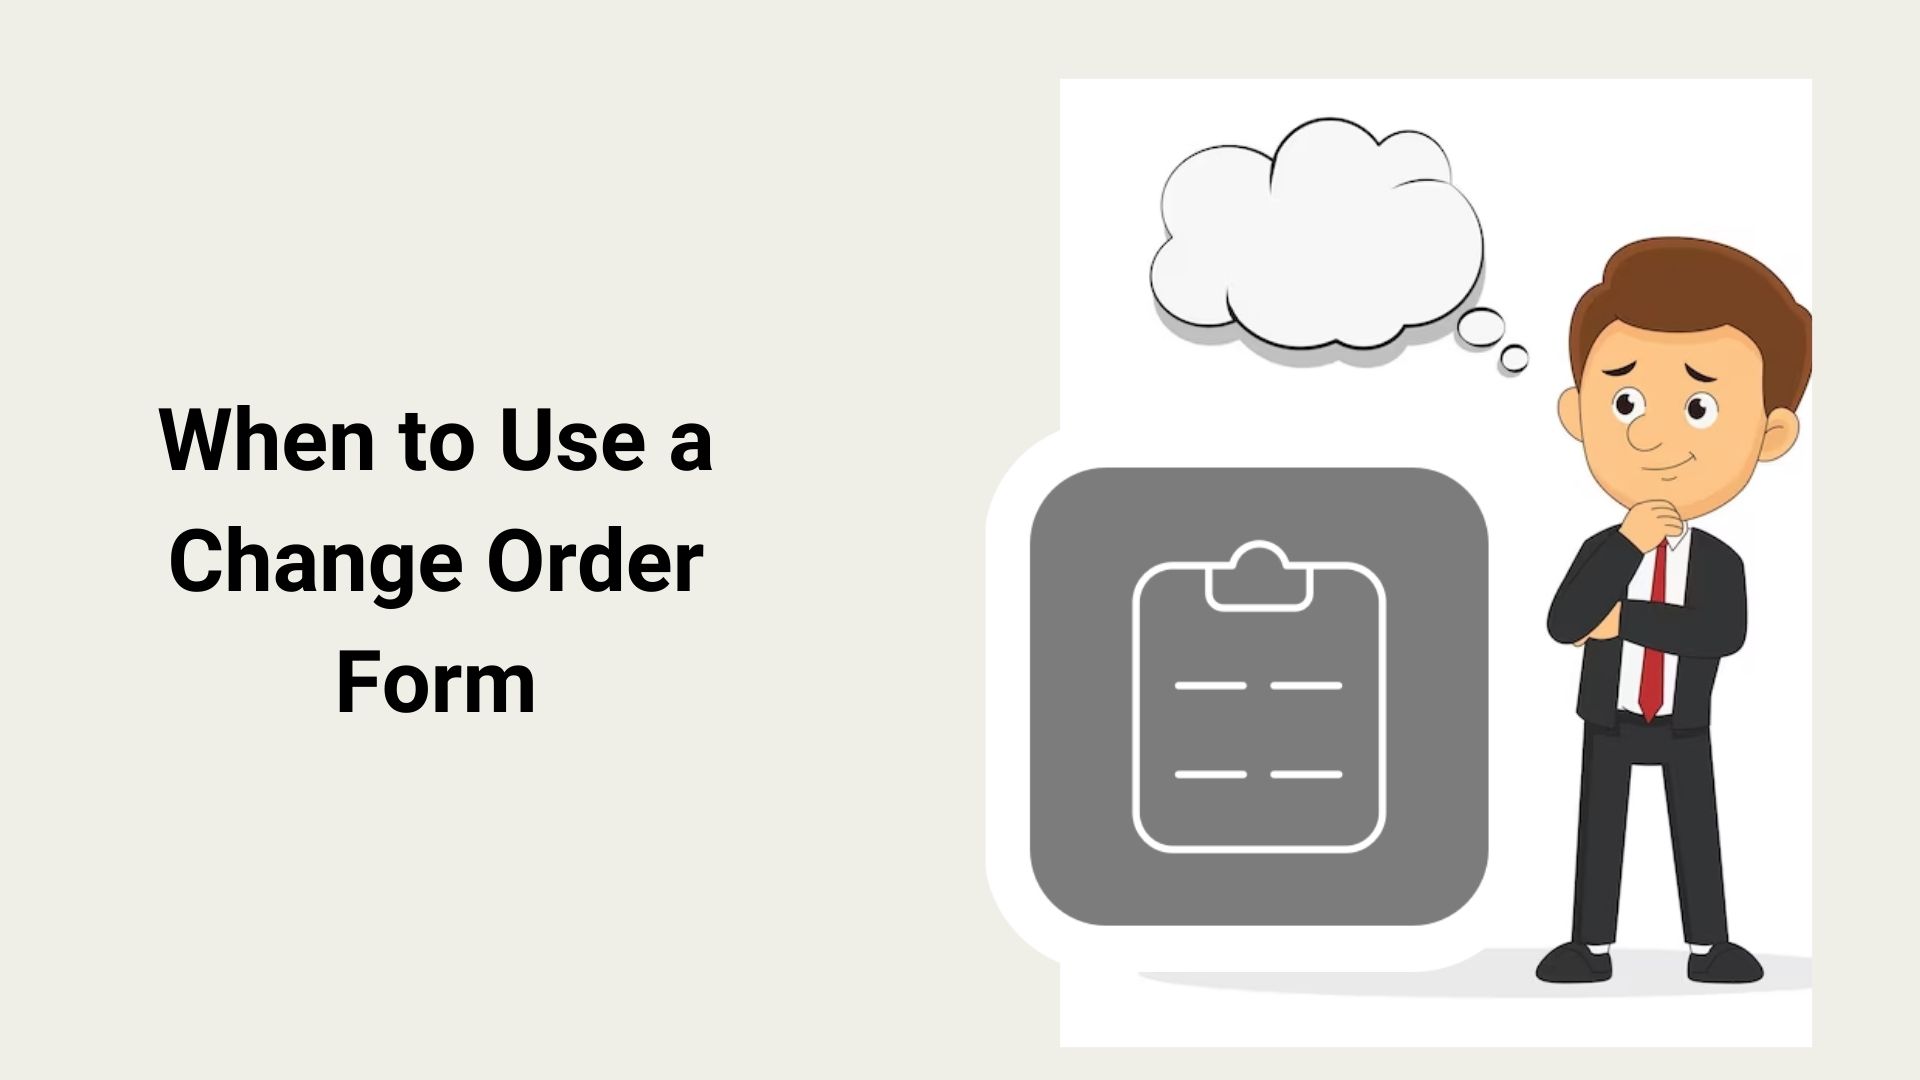 When to use a Change Order Form